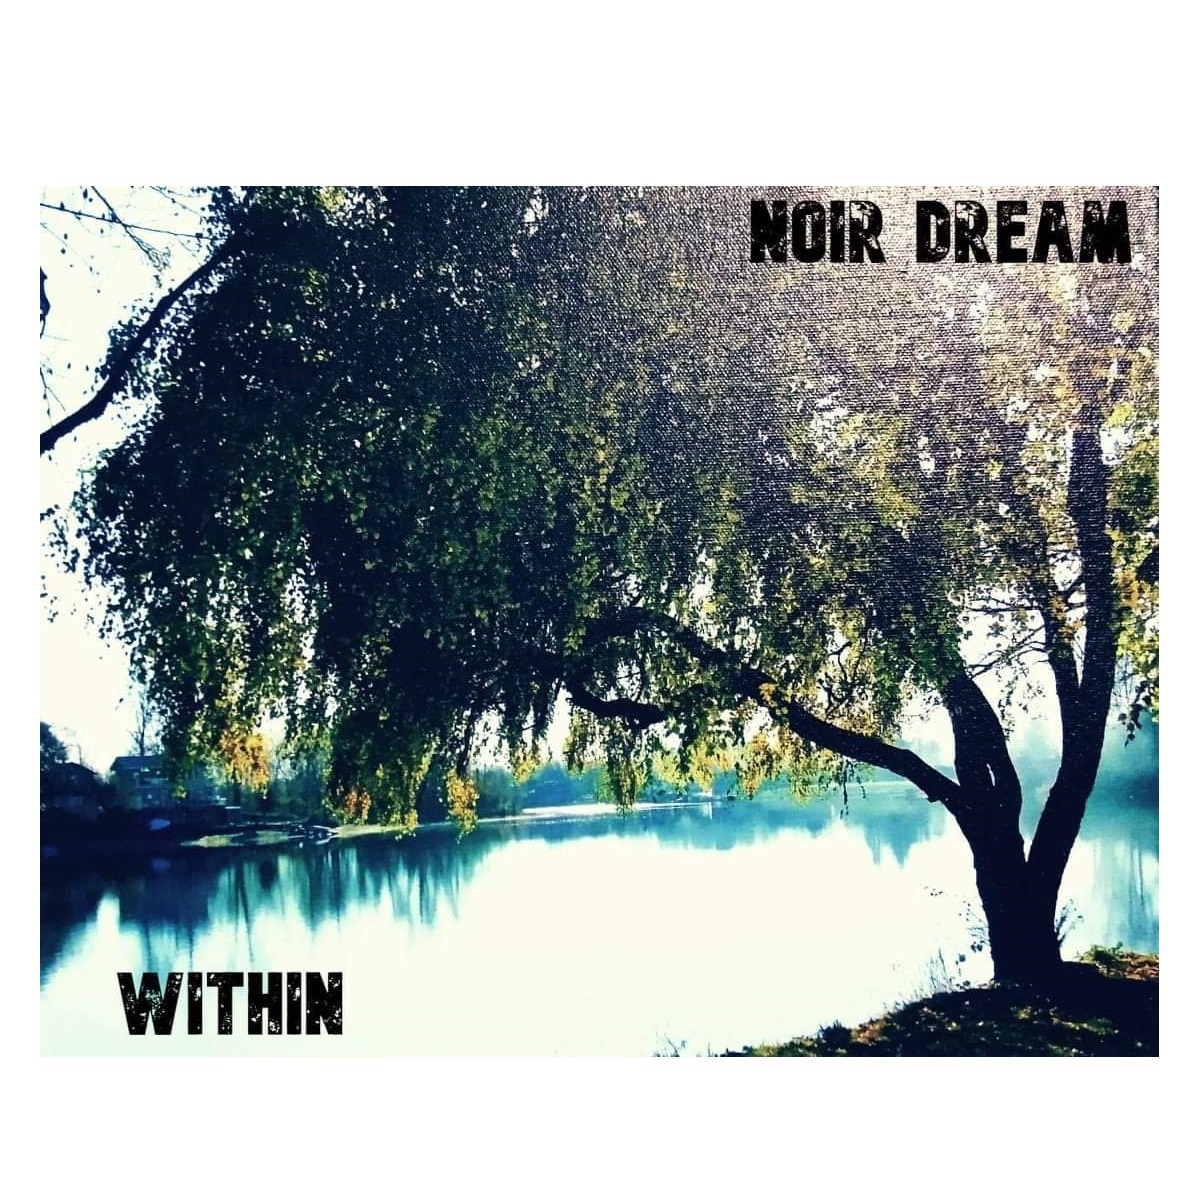 Developing Healing and Kindling Hope Through the Universality of Rock - Noir Dream’s 6-Track EP ‘Within’ Set to Inspire